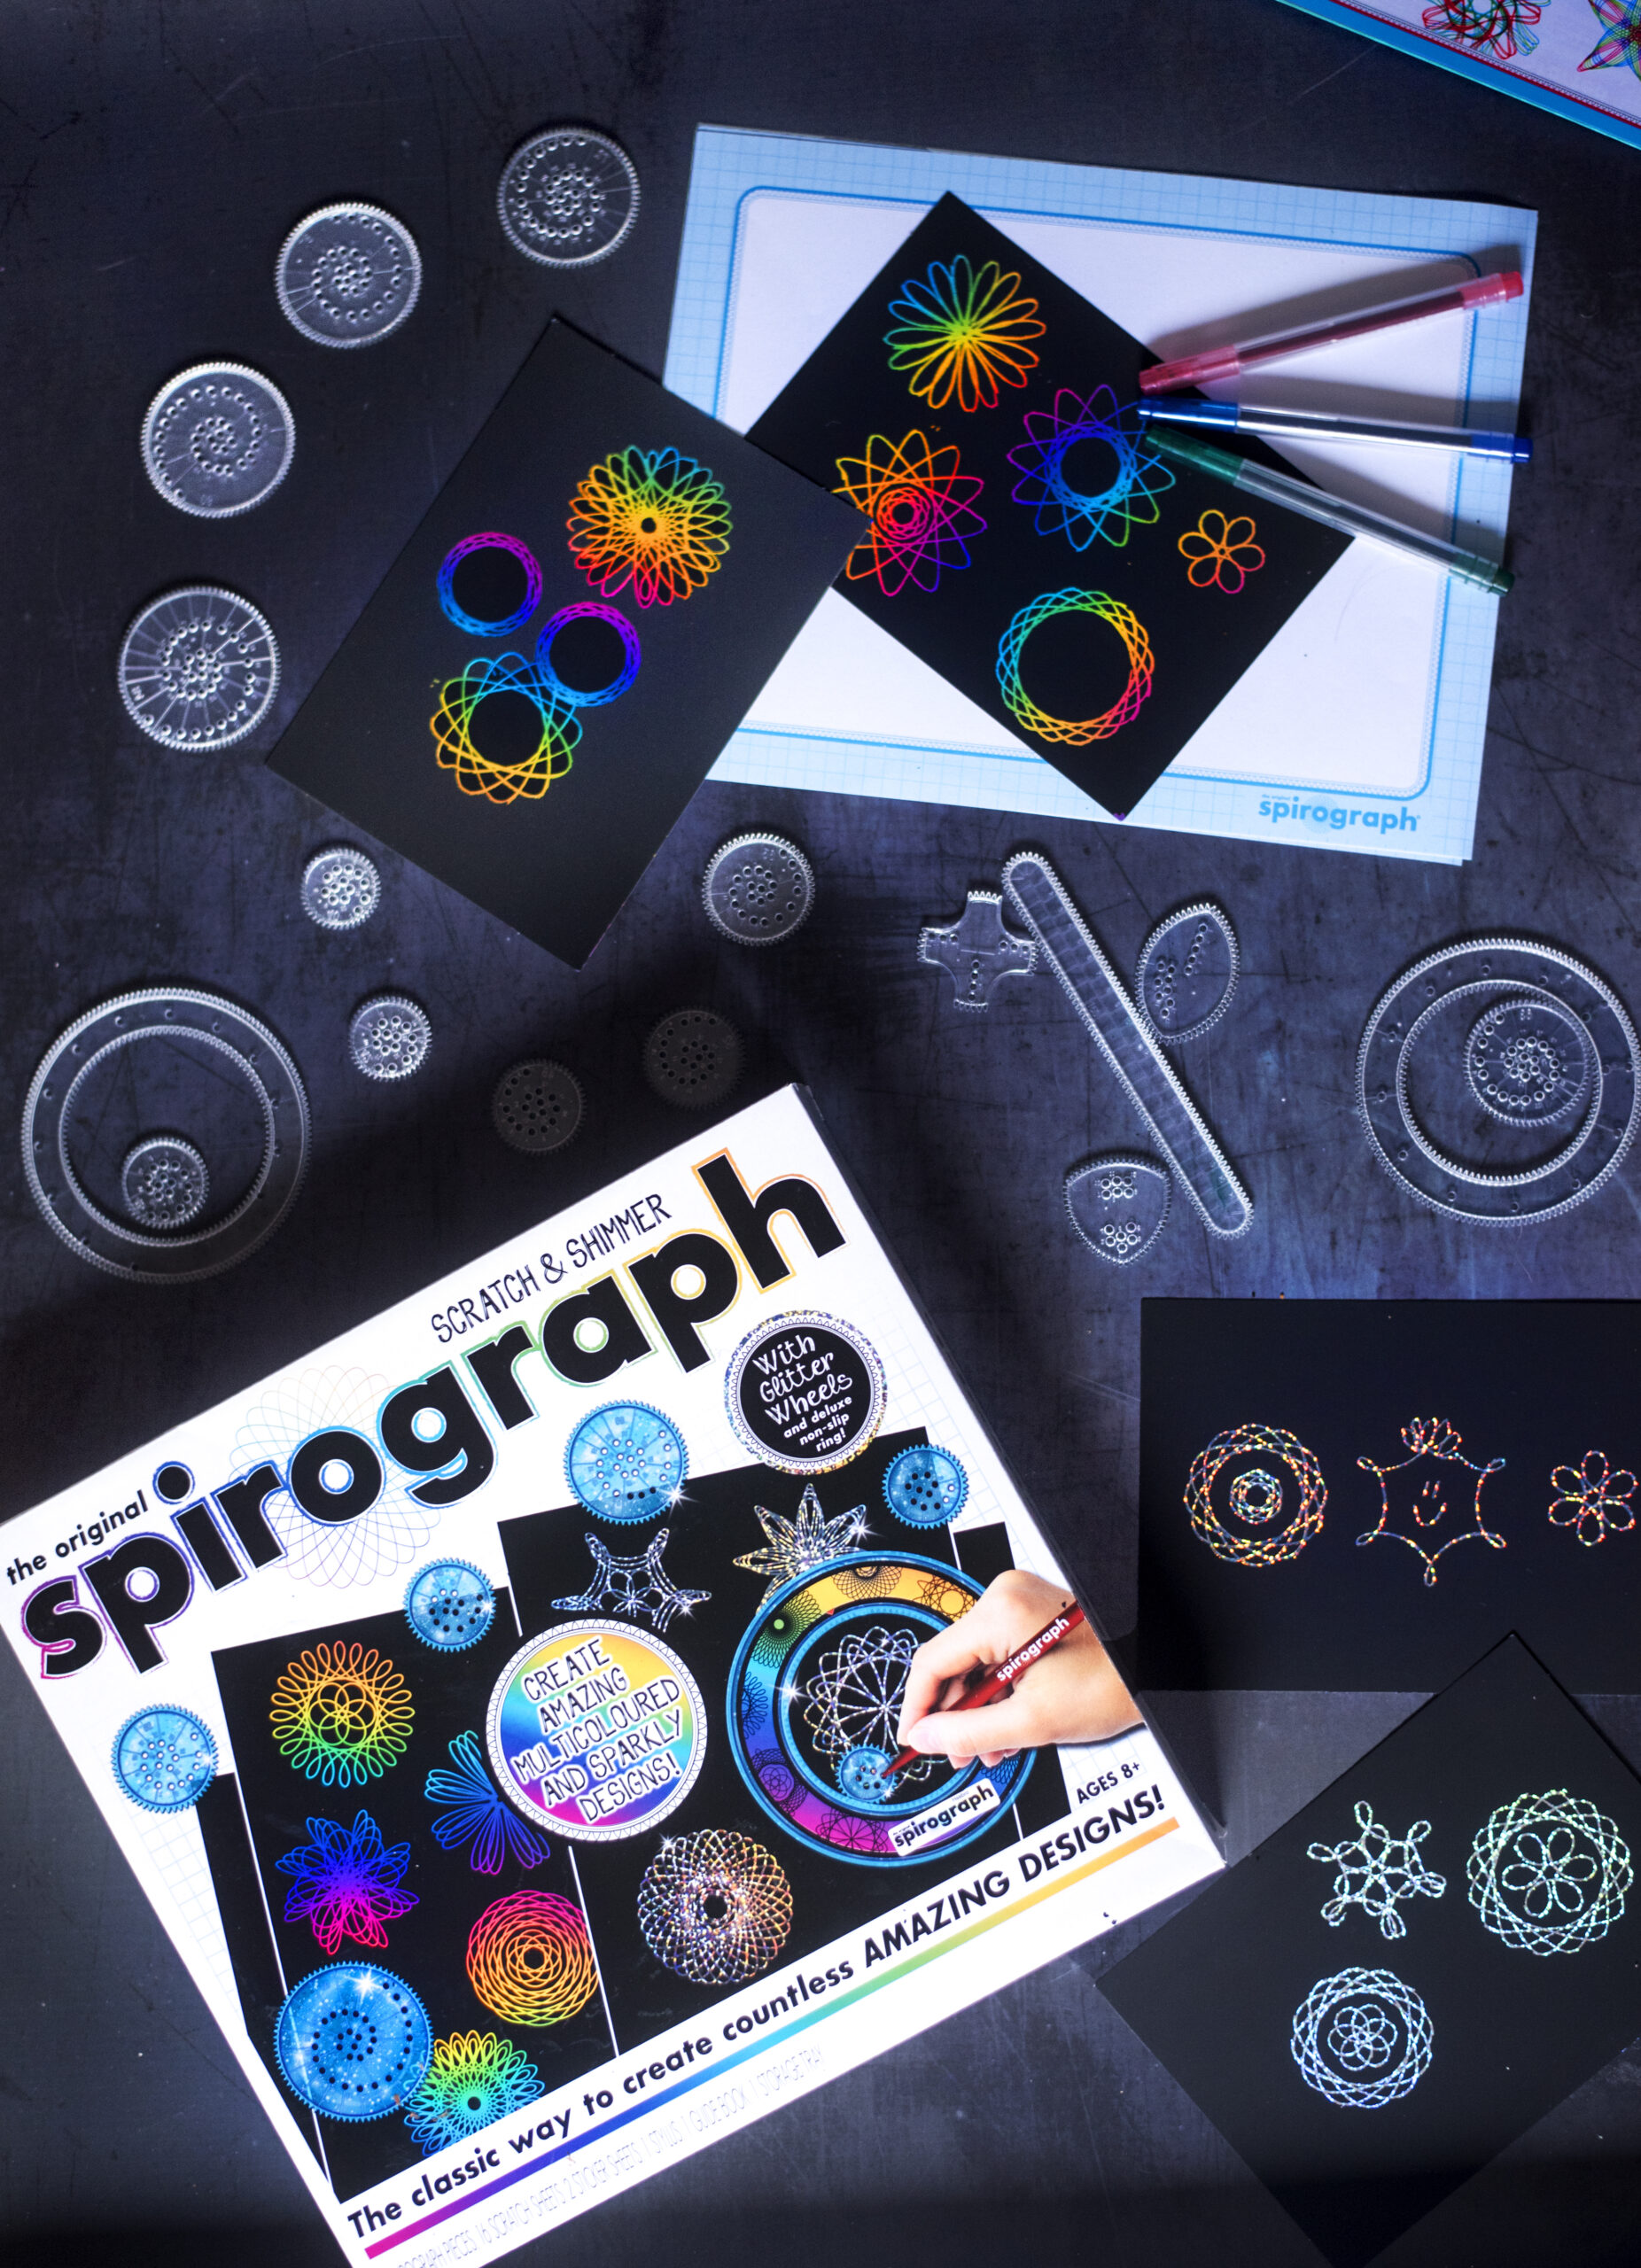 SPIROGRAPH AND OTHER FUN FROM HERITAGE BRANDS